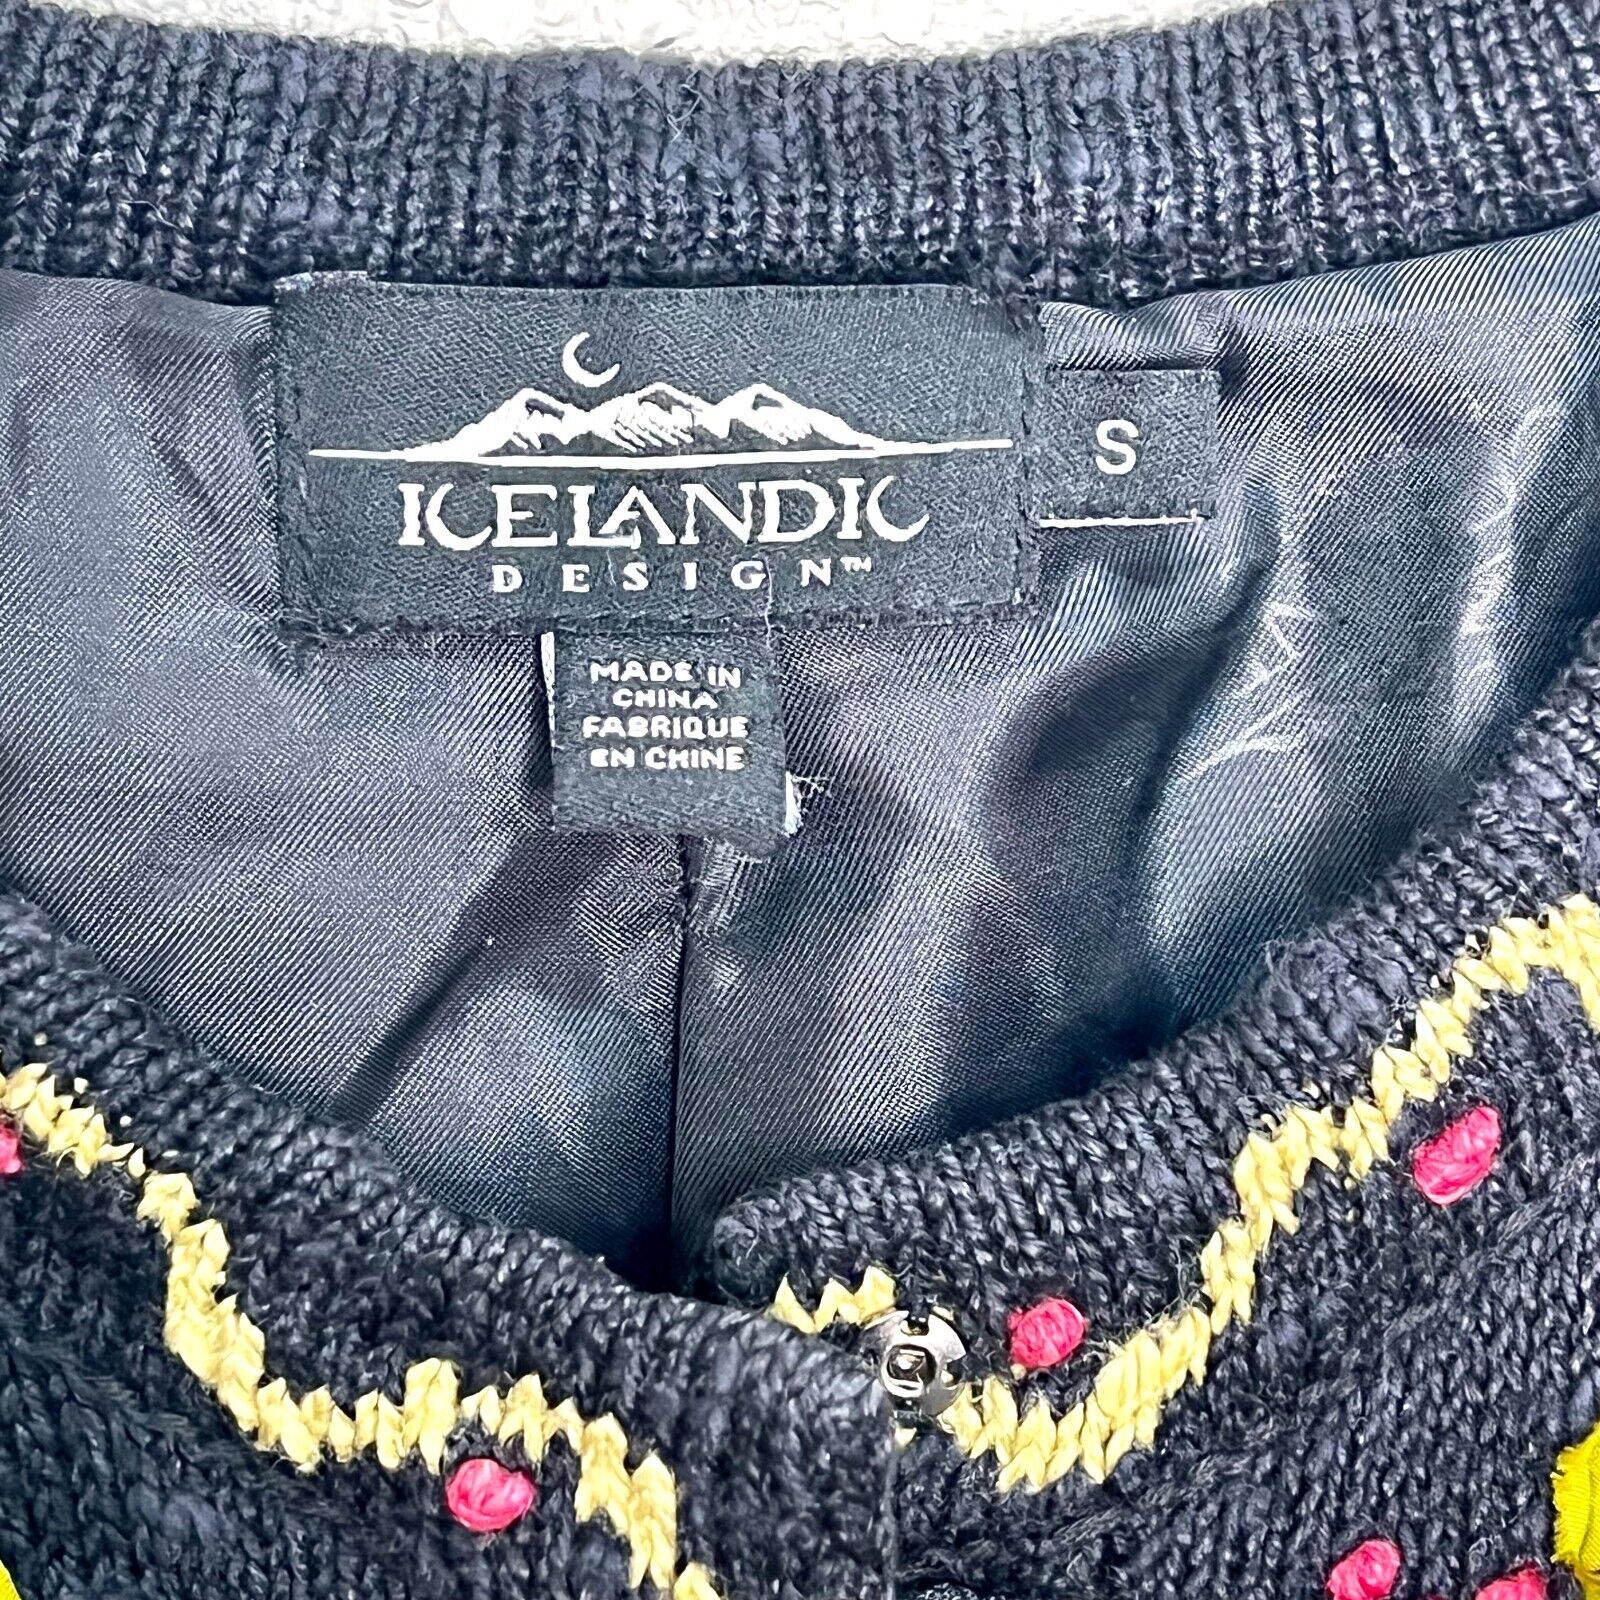 Icelandic Design Sweater Jacket Full Zip Lined Ribbon Applique Black Size Small